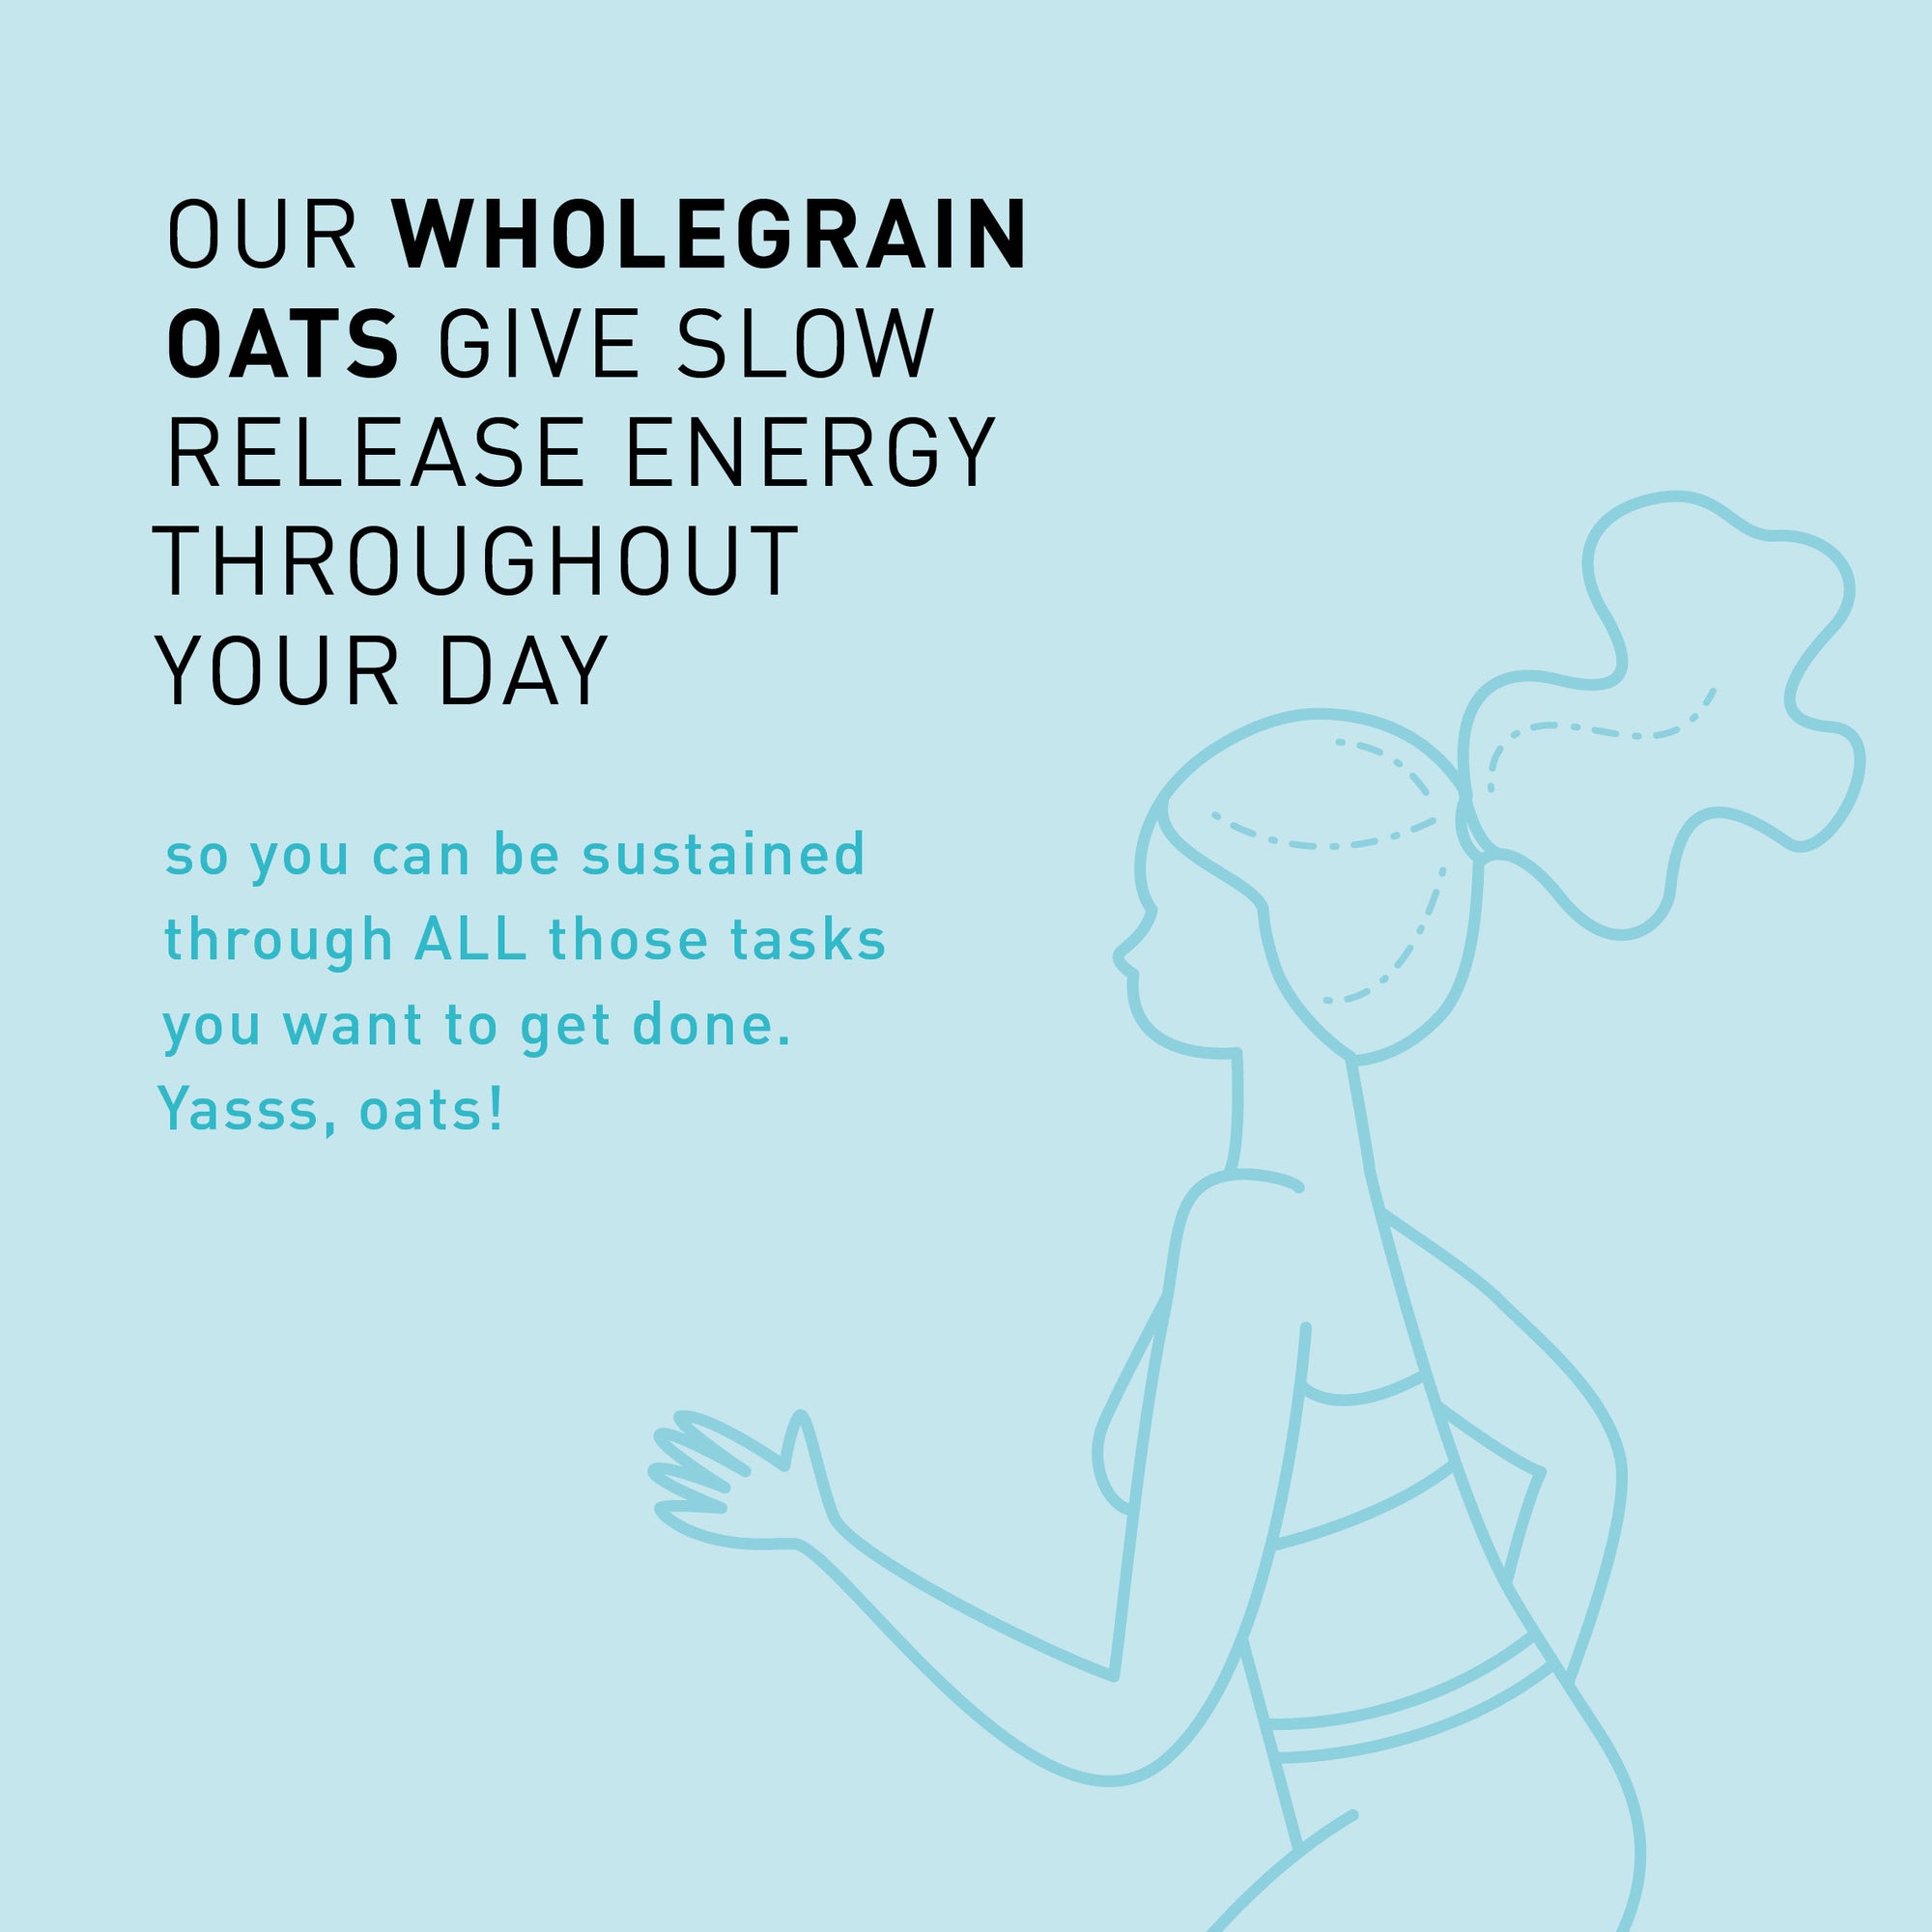 F A C T: Oats powering your to-do list